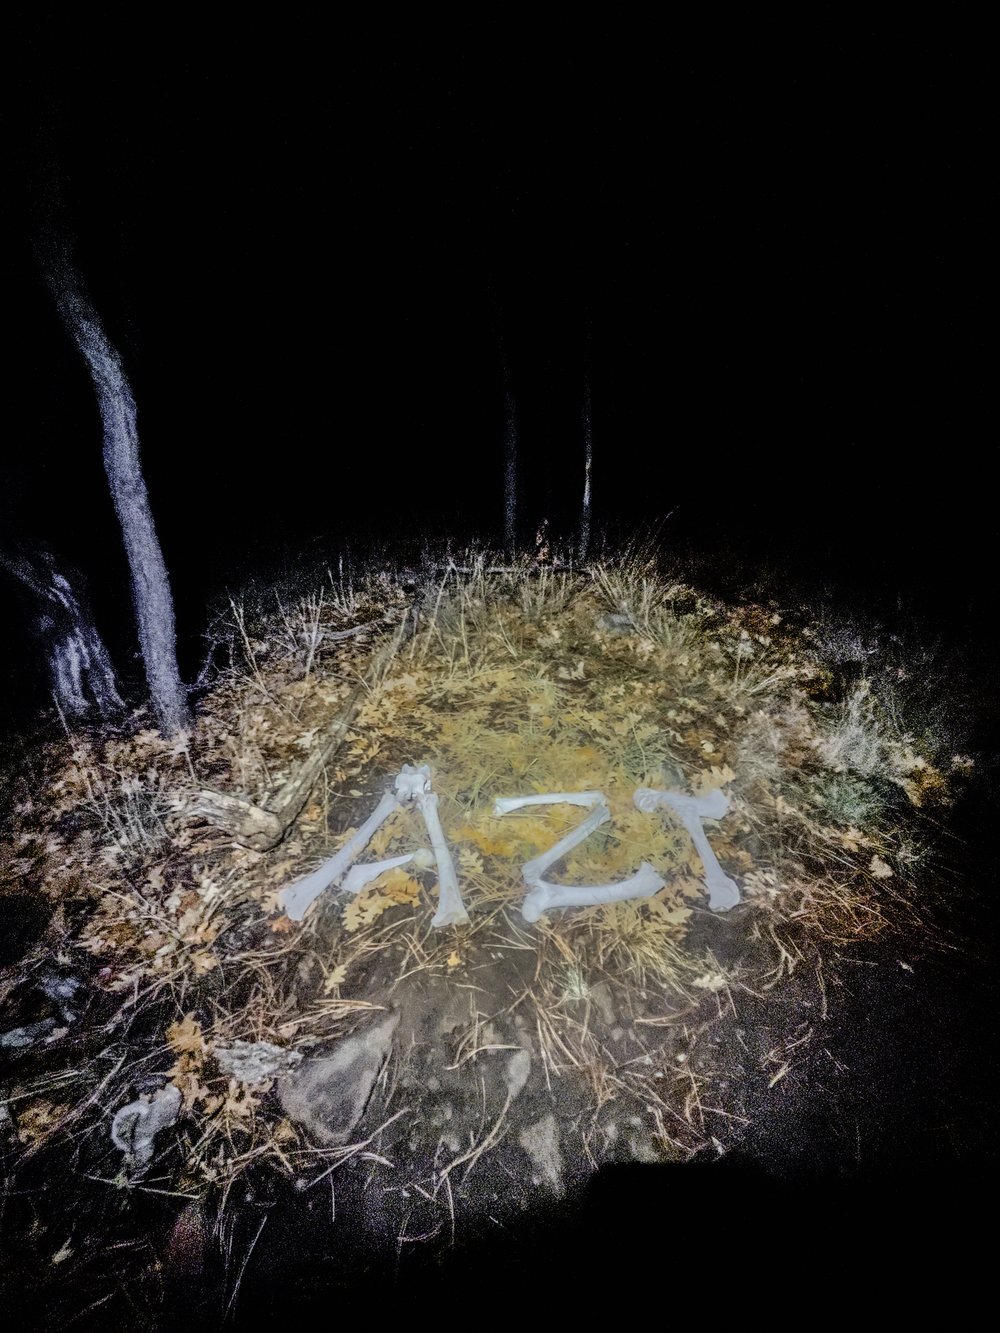  spotted trailside… a sign?  